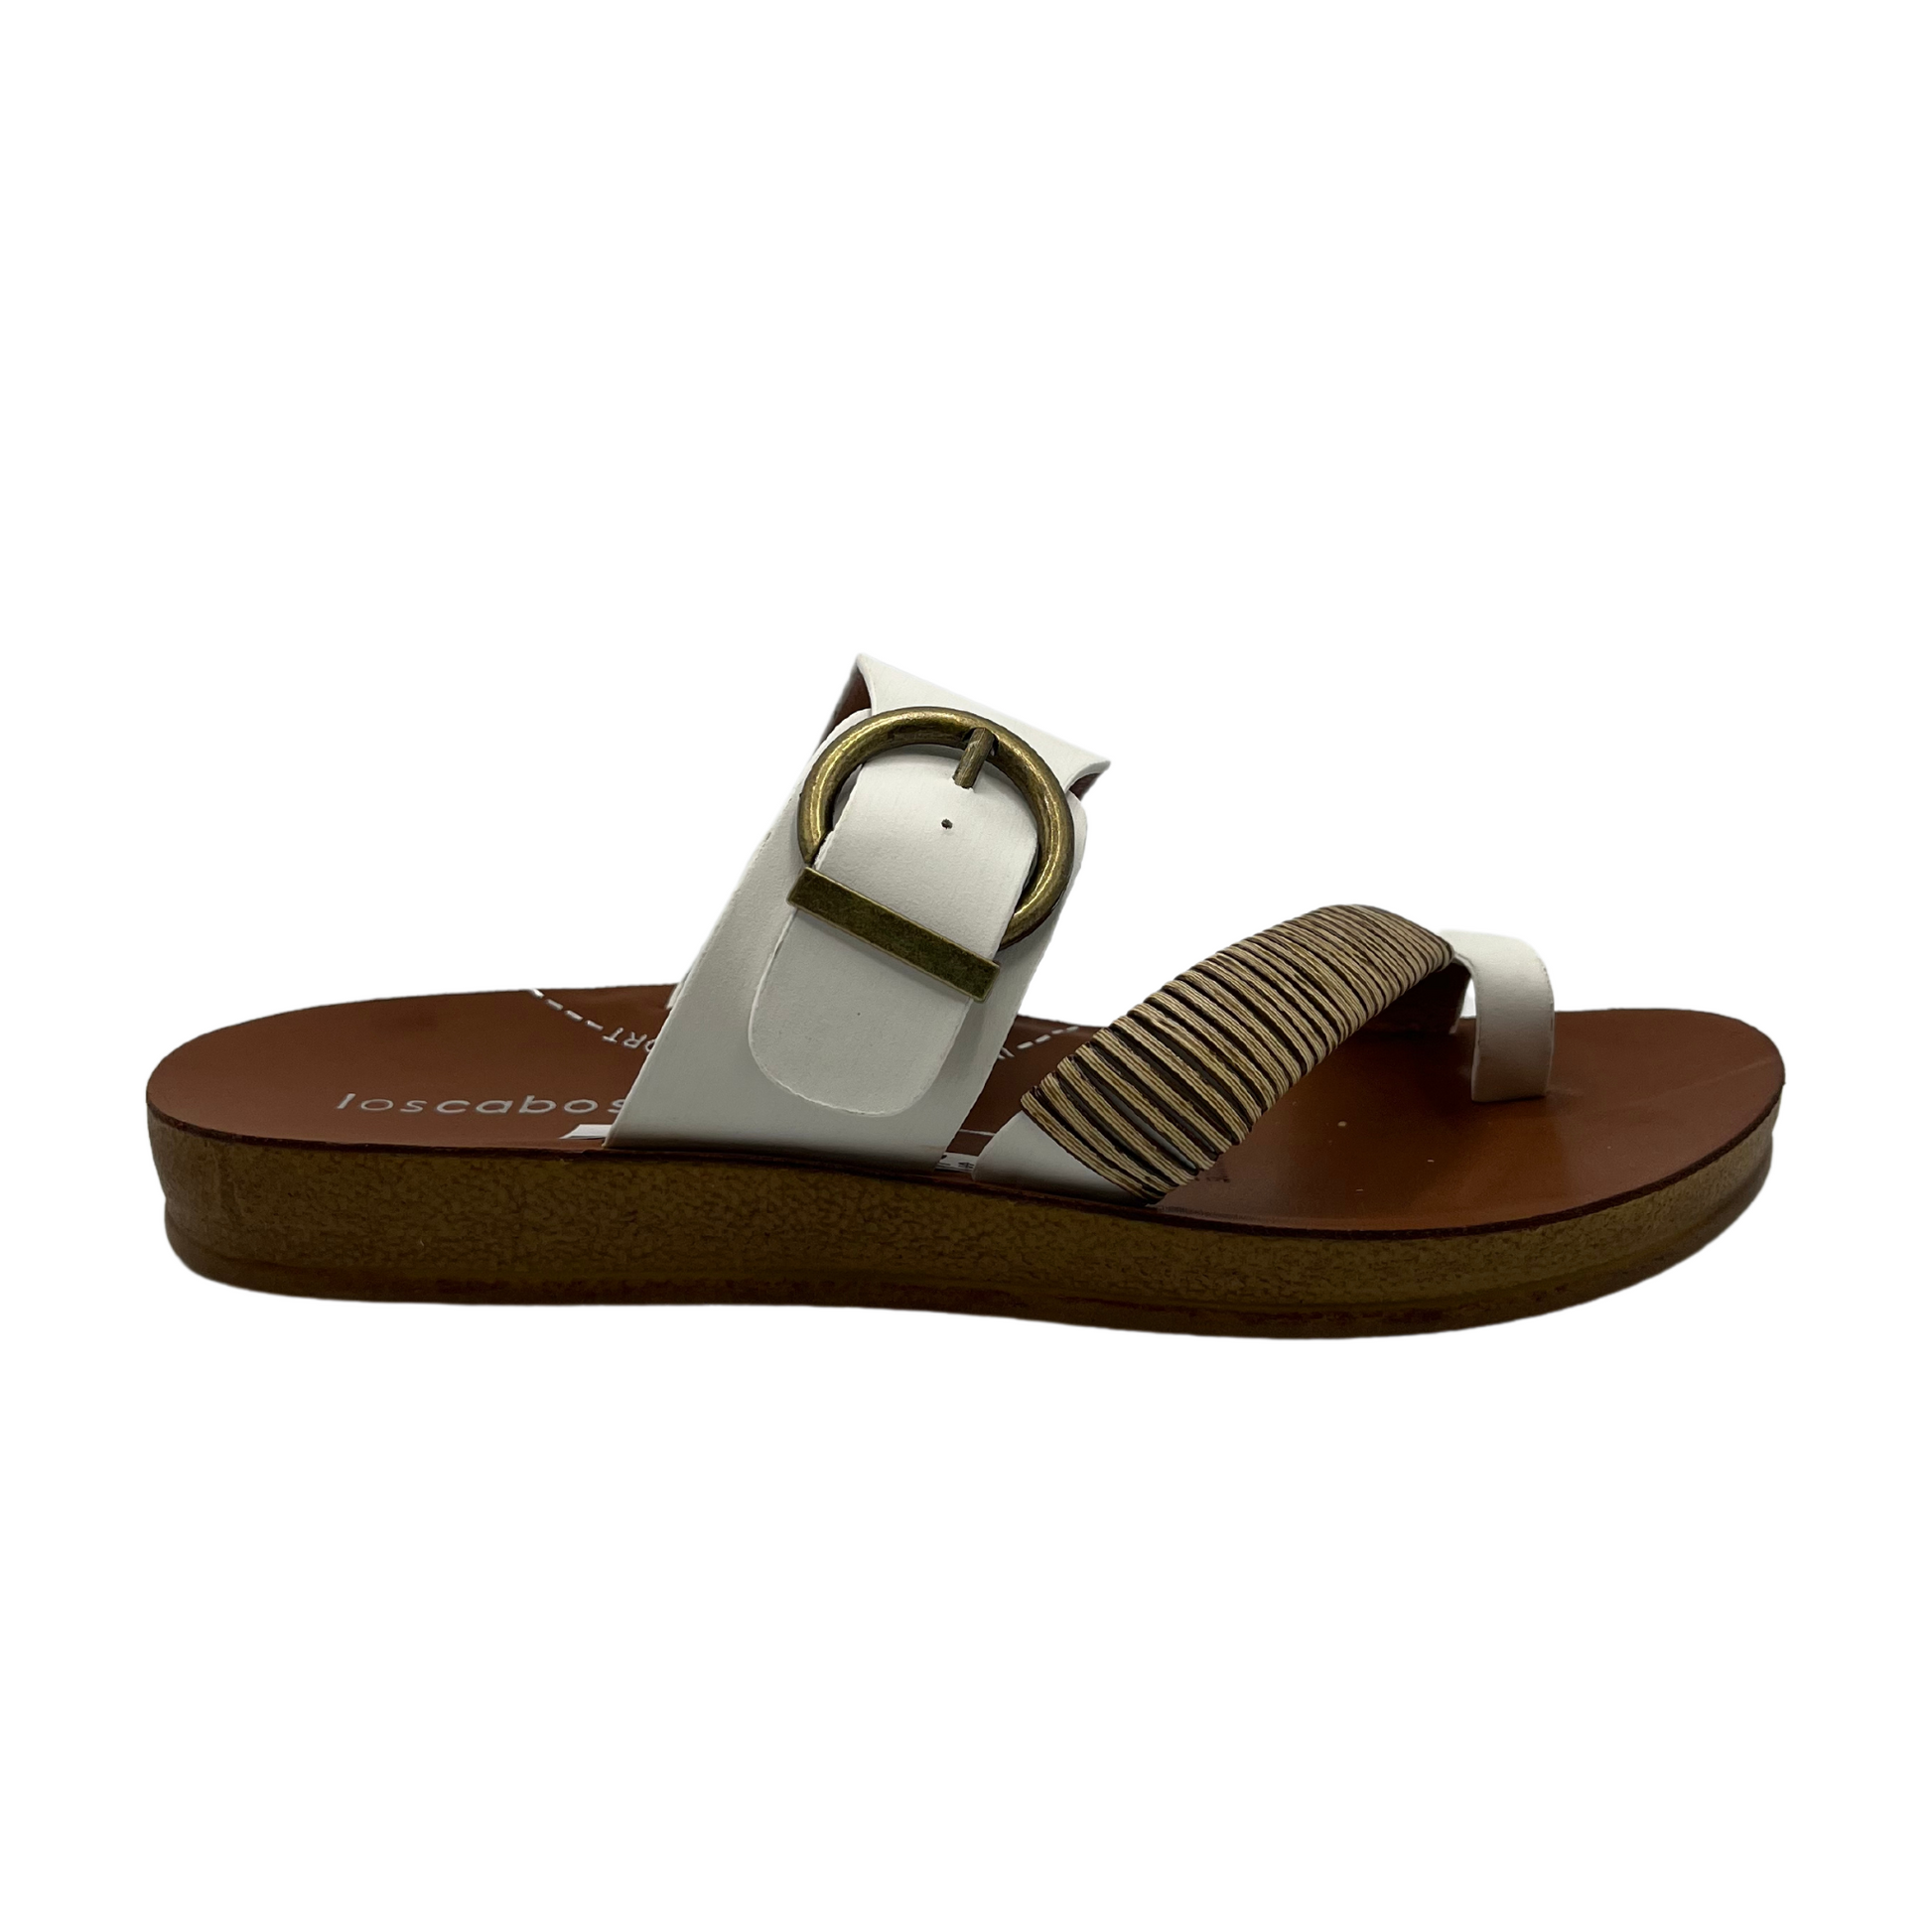 Right facing view of white leather sandal with gold buckle and brown insole